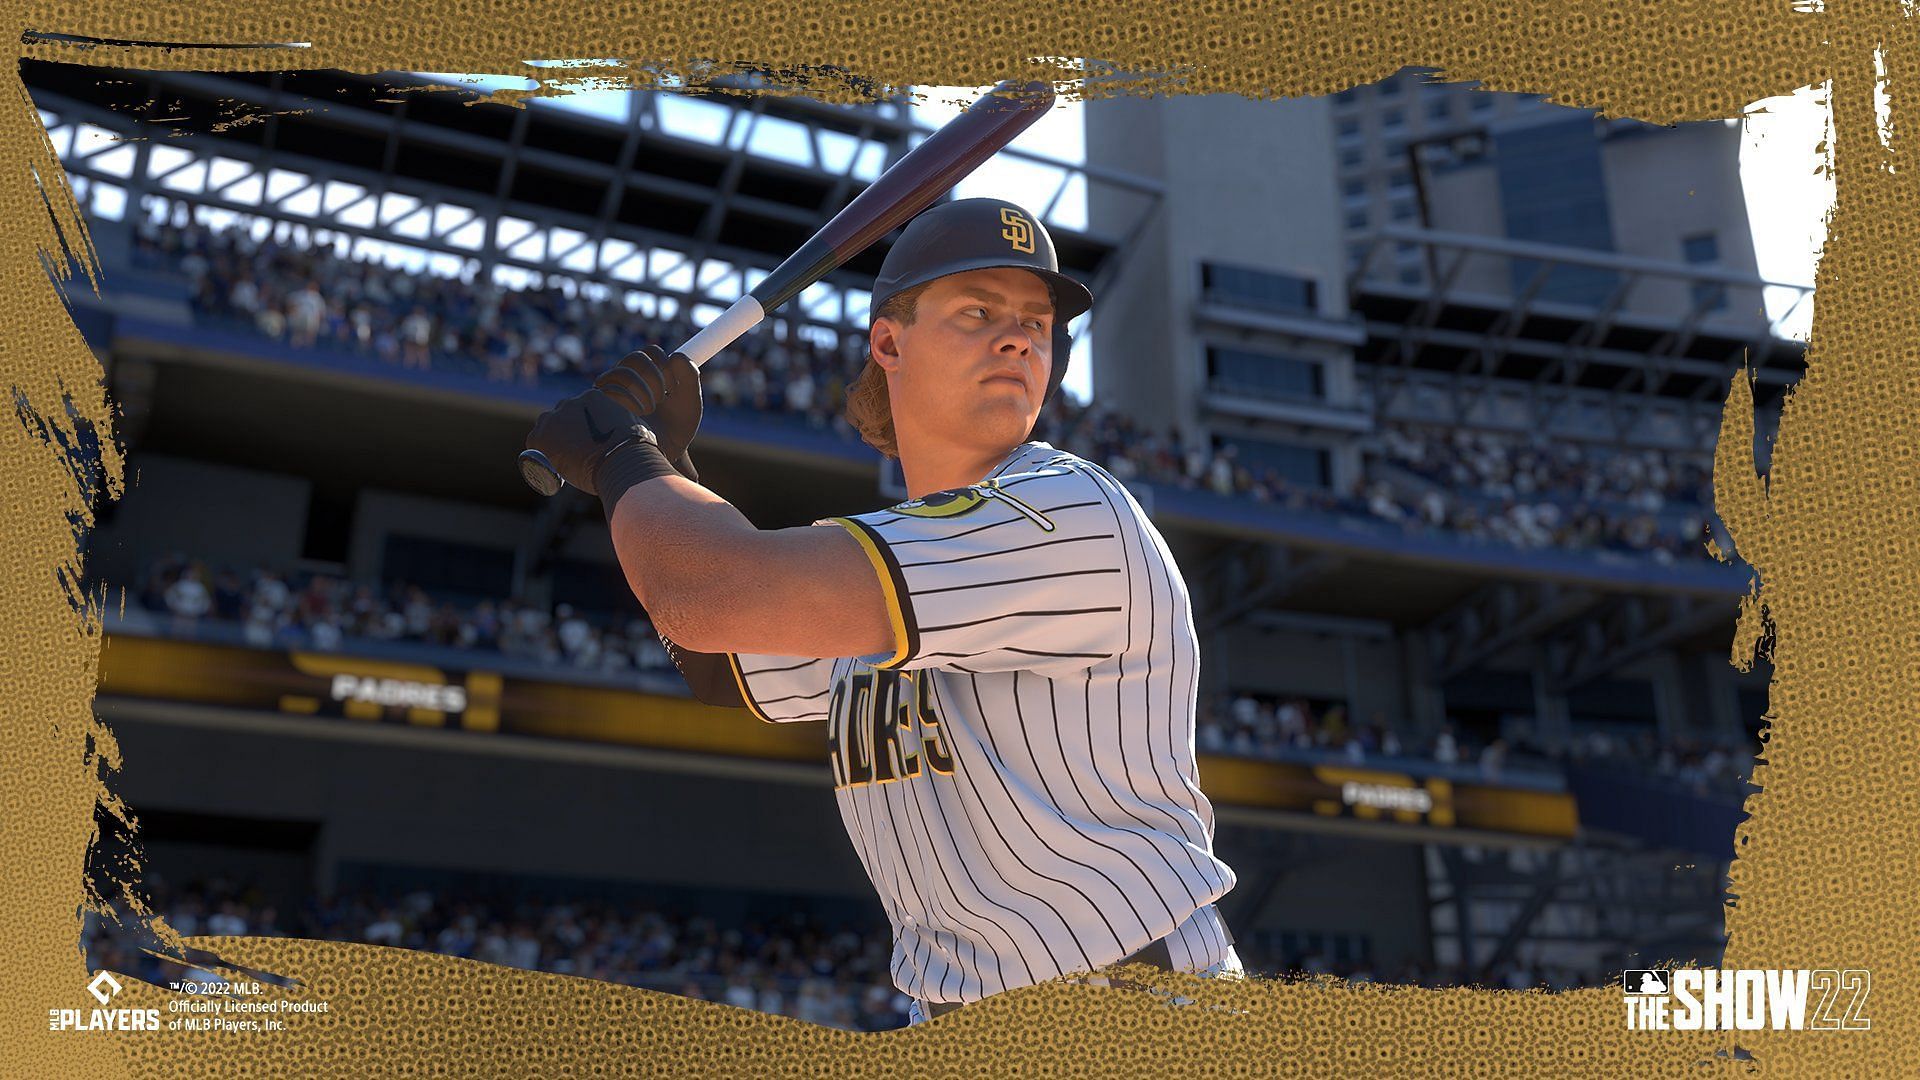 Luke Voit in The Show (Image via MLB The Show Twitter page)